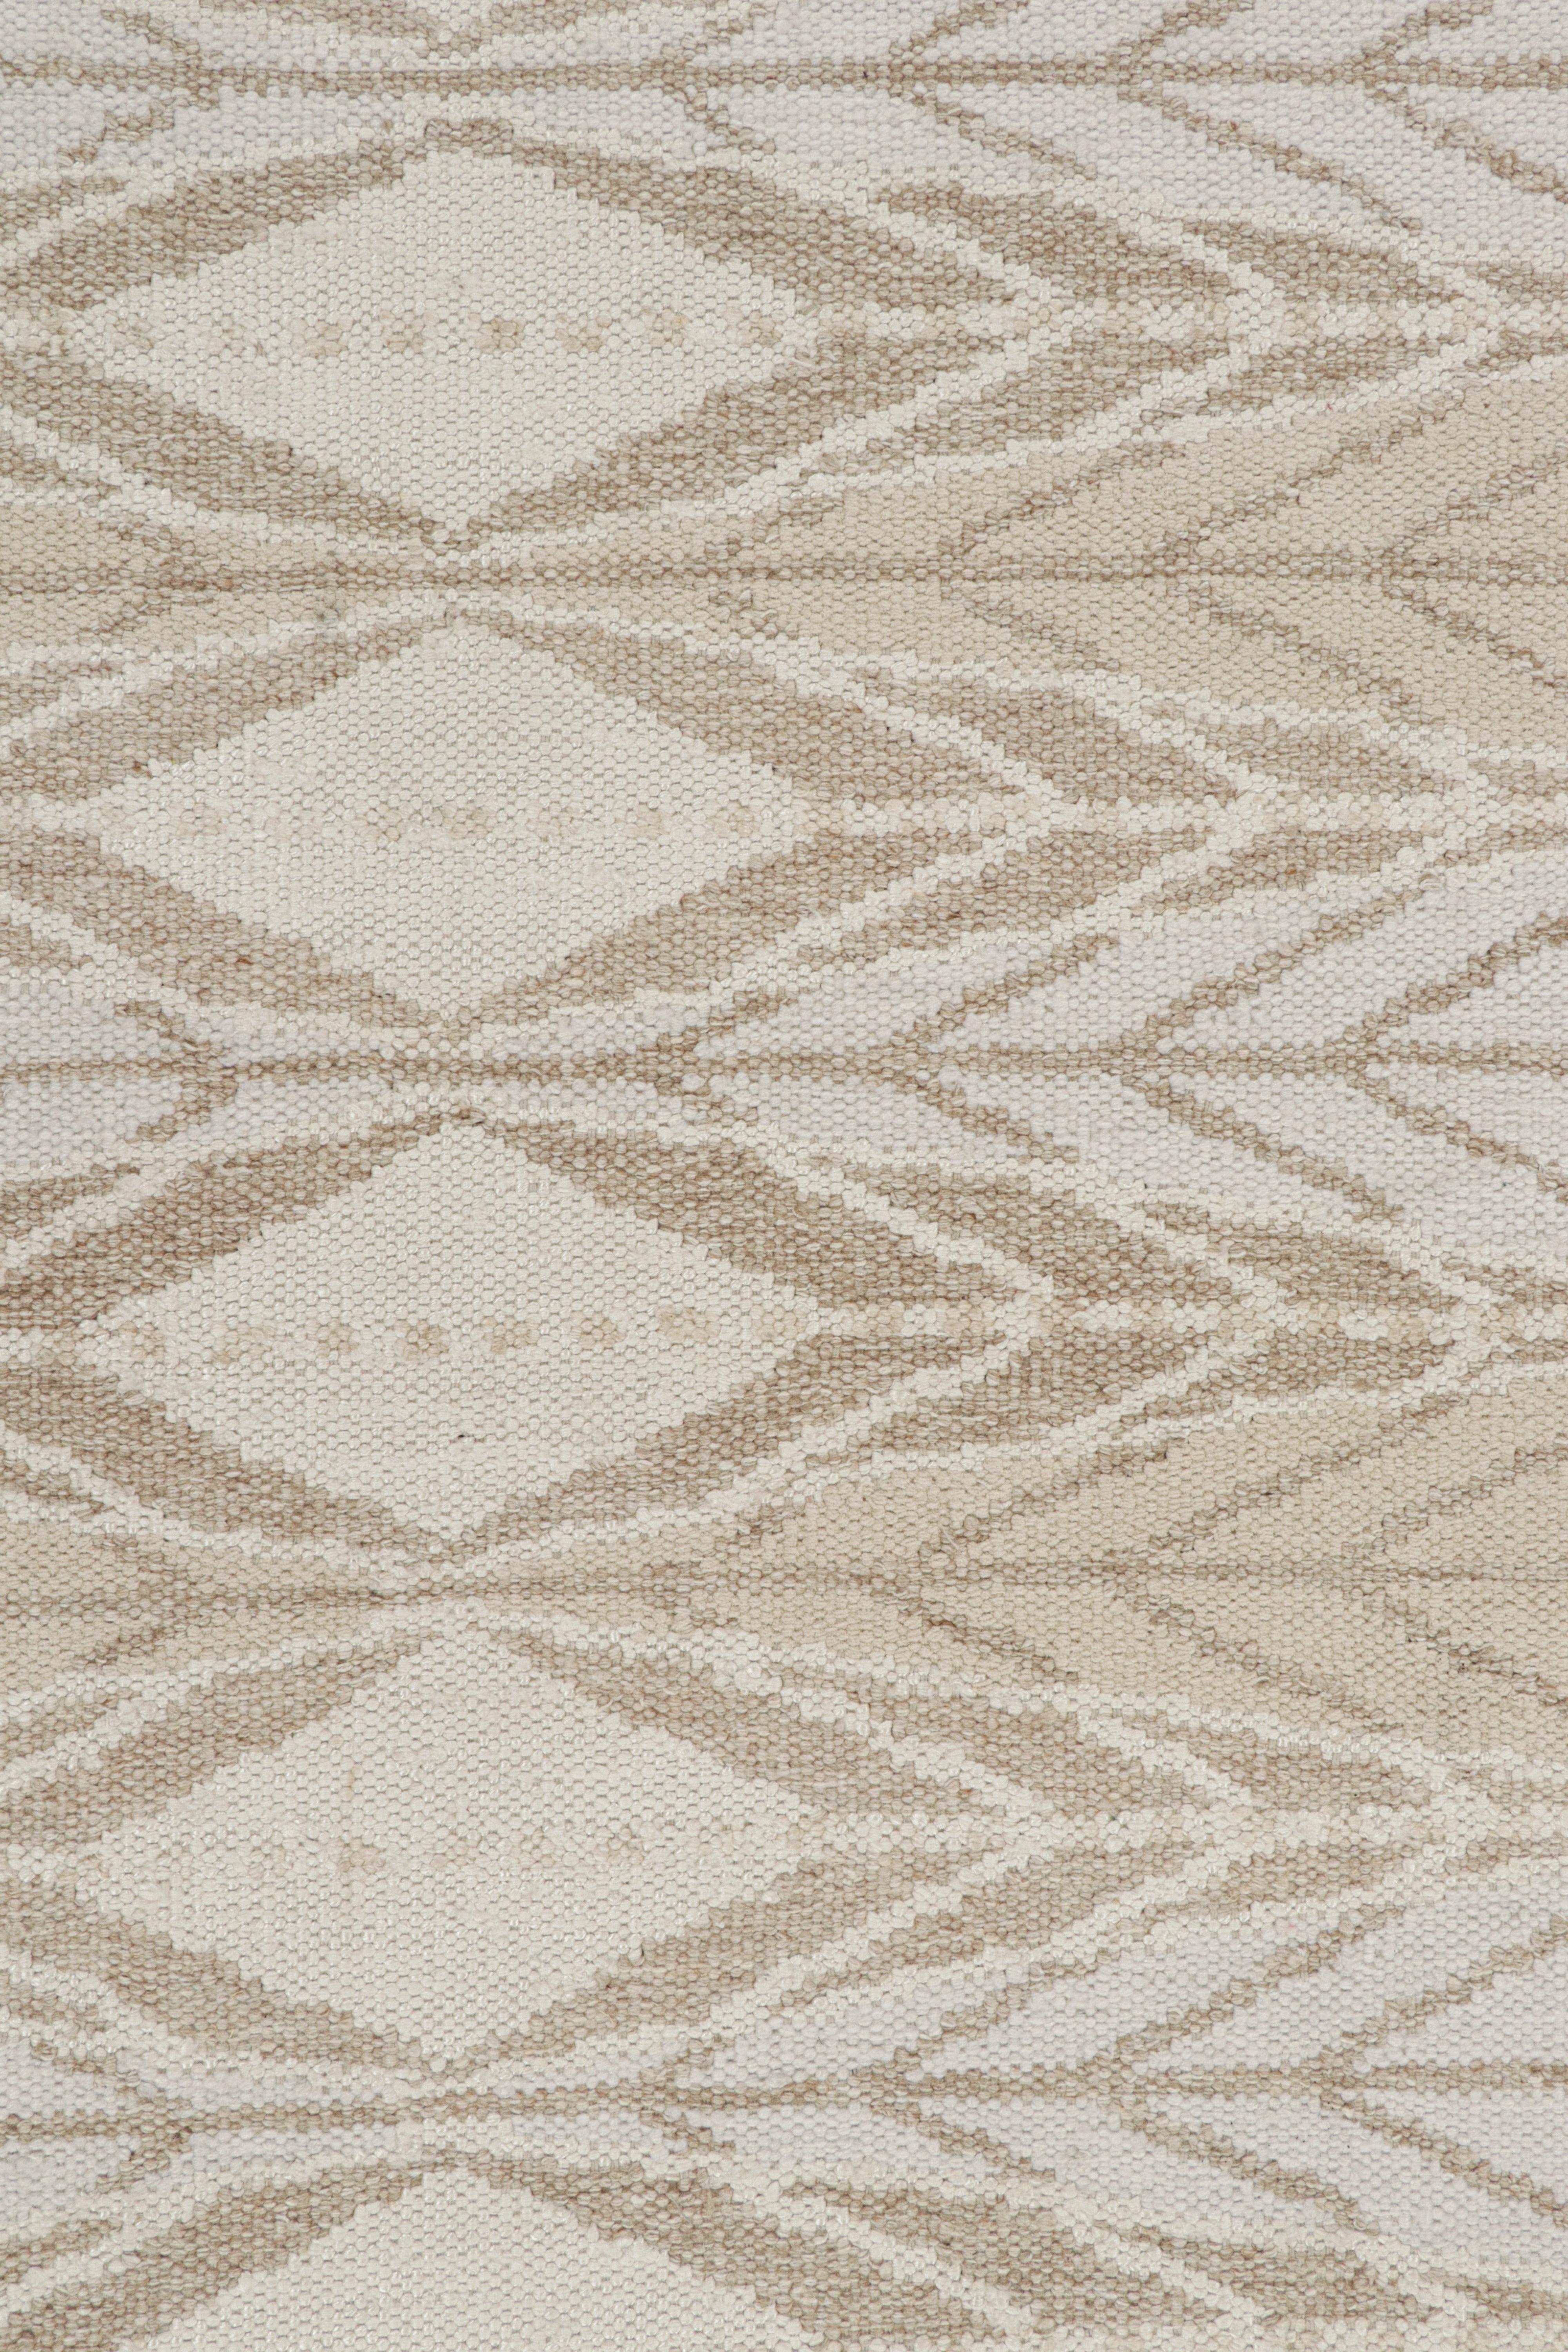 Modern Rug & Kilim’s Scandinavian Style Kilim in Taupe and White Geometric Pattern For Sale